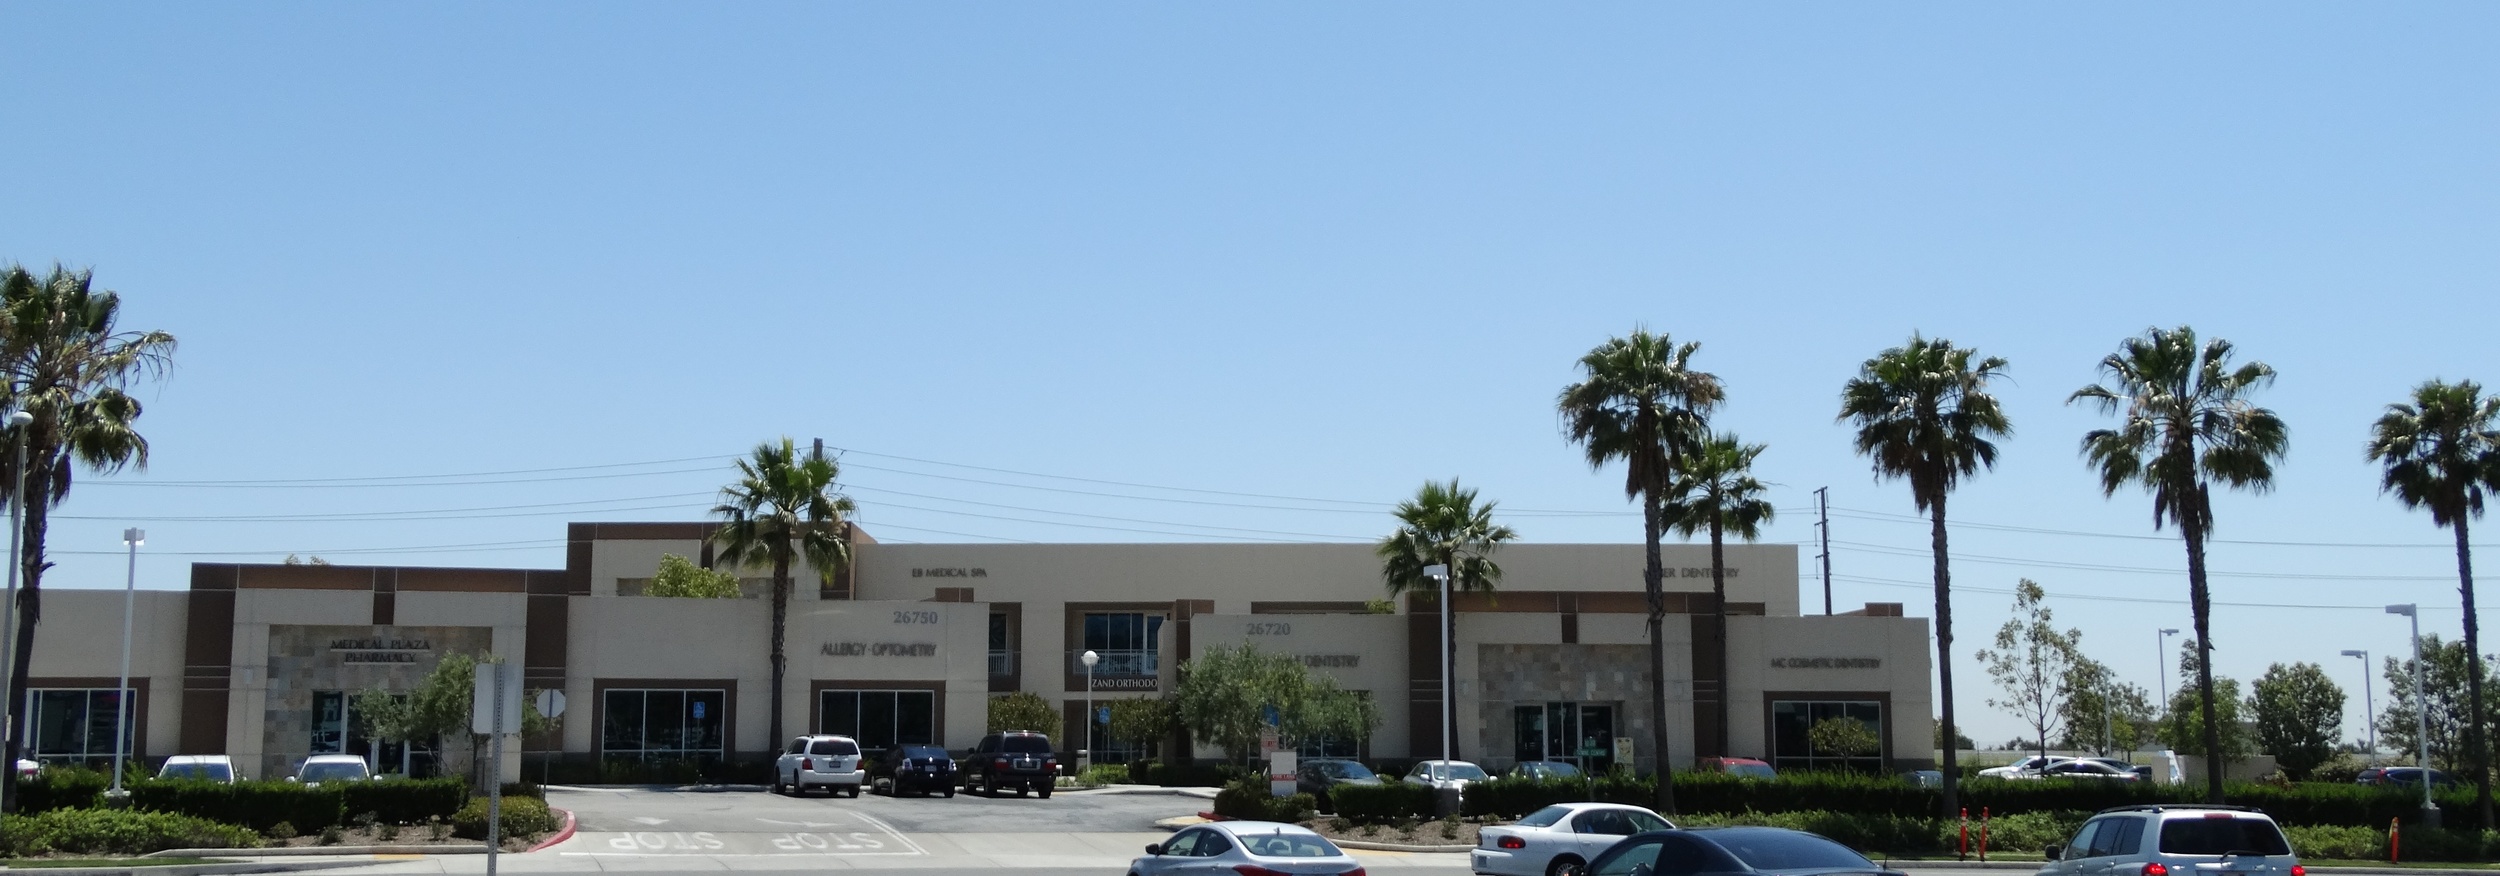  The Foothill Ranch Medical Plaza is located&nbsp;at the corner of Auto Center Drive and Towne Center&nbsp;Drive in Foothill Ranch. 